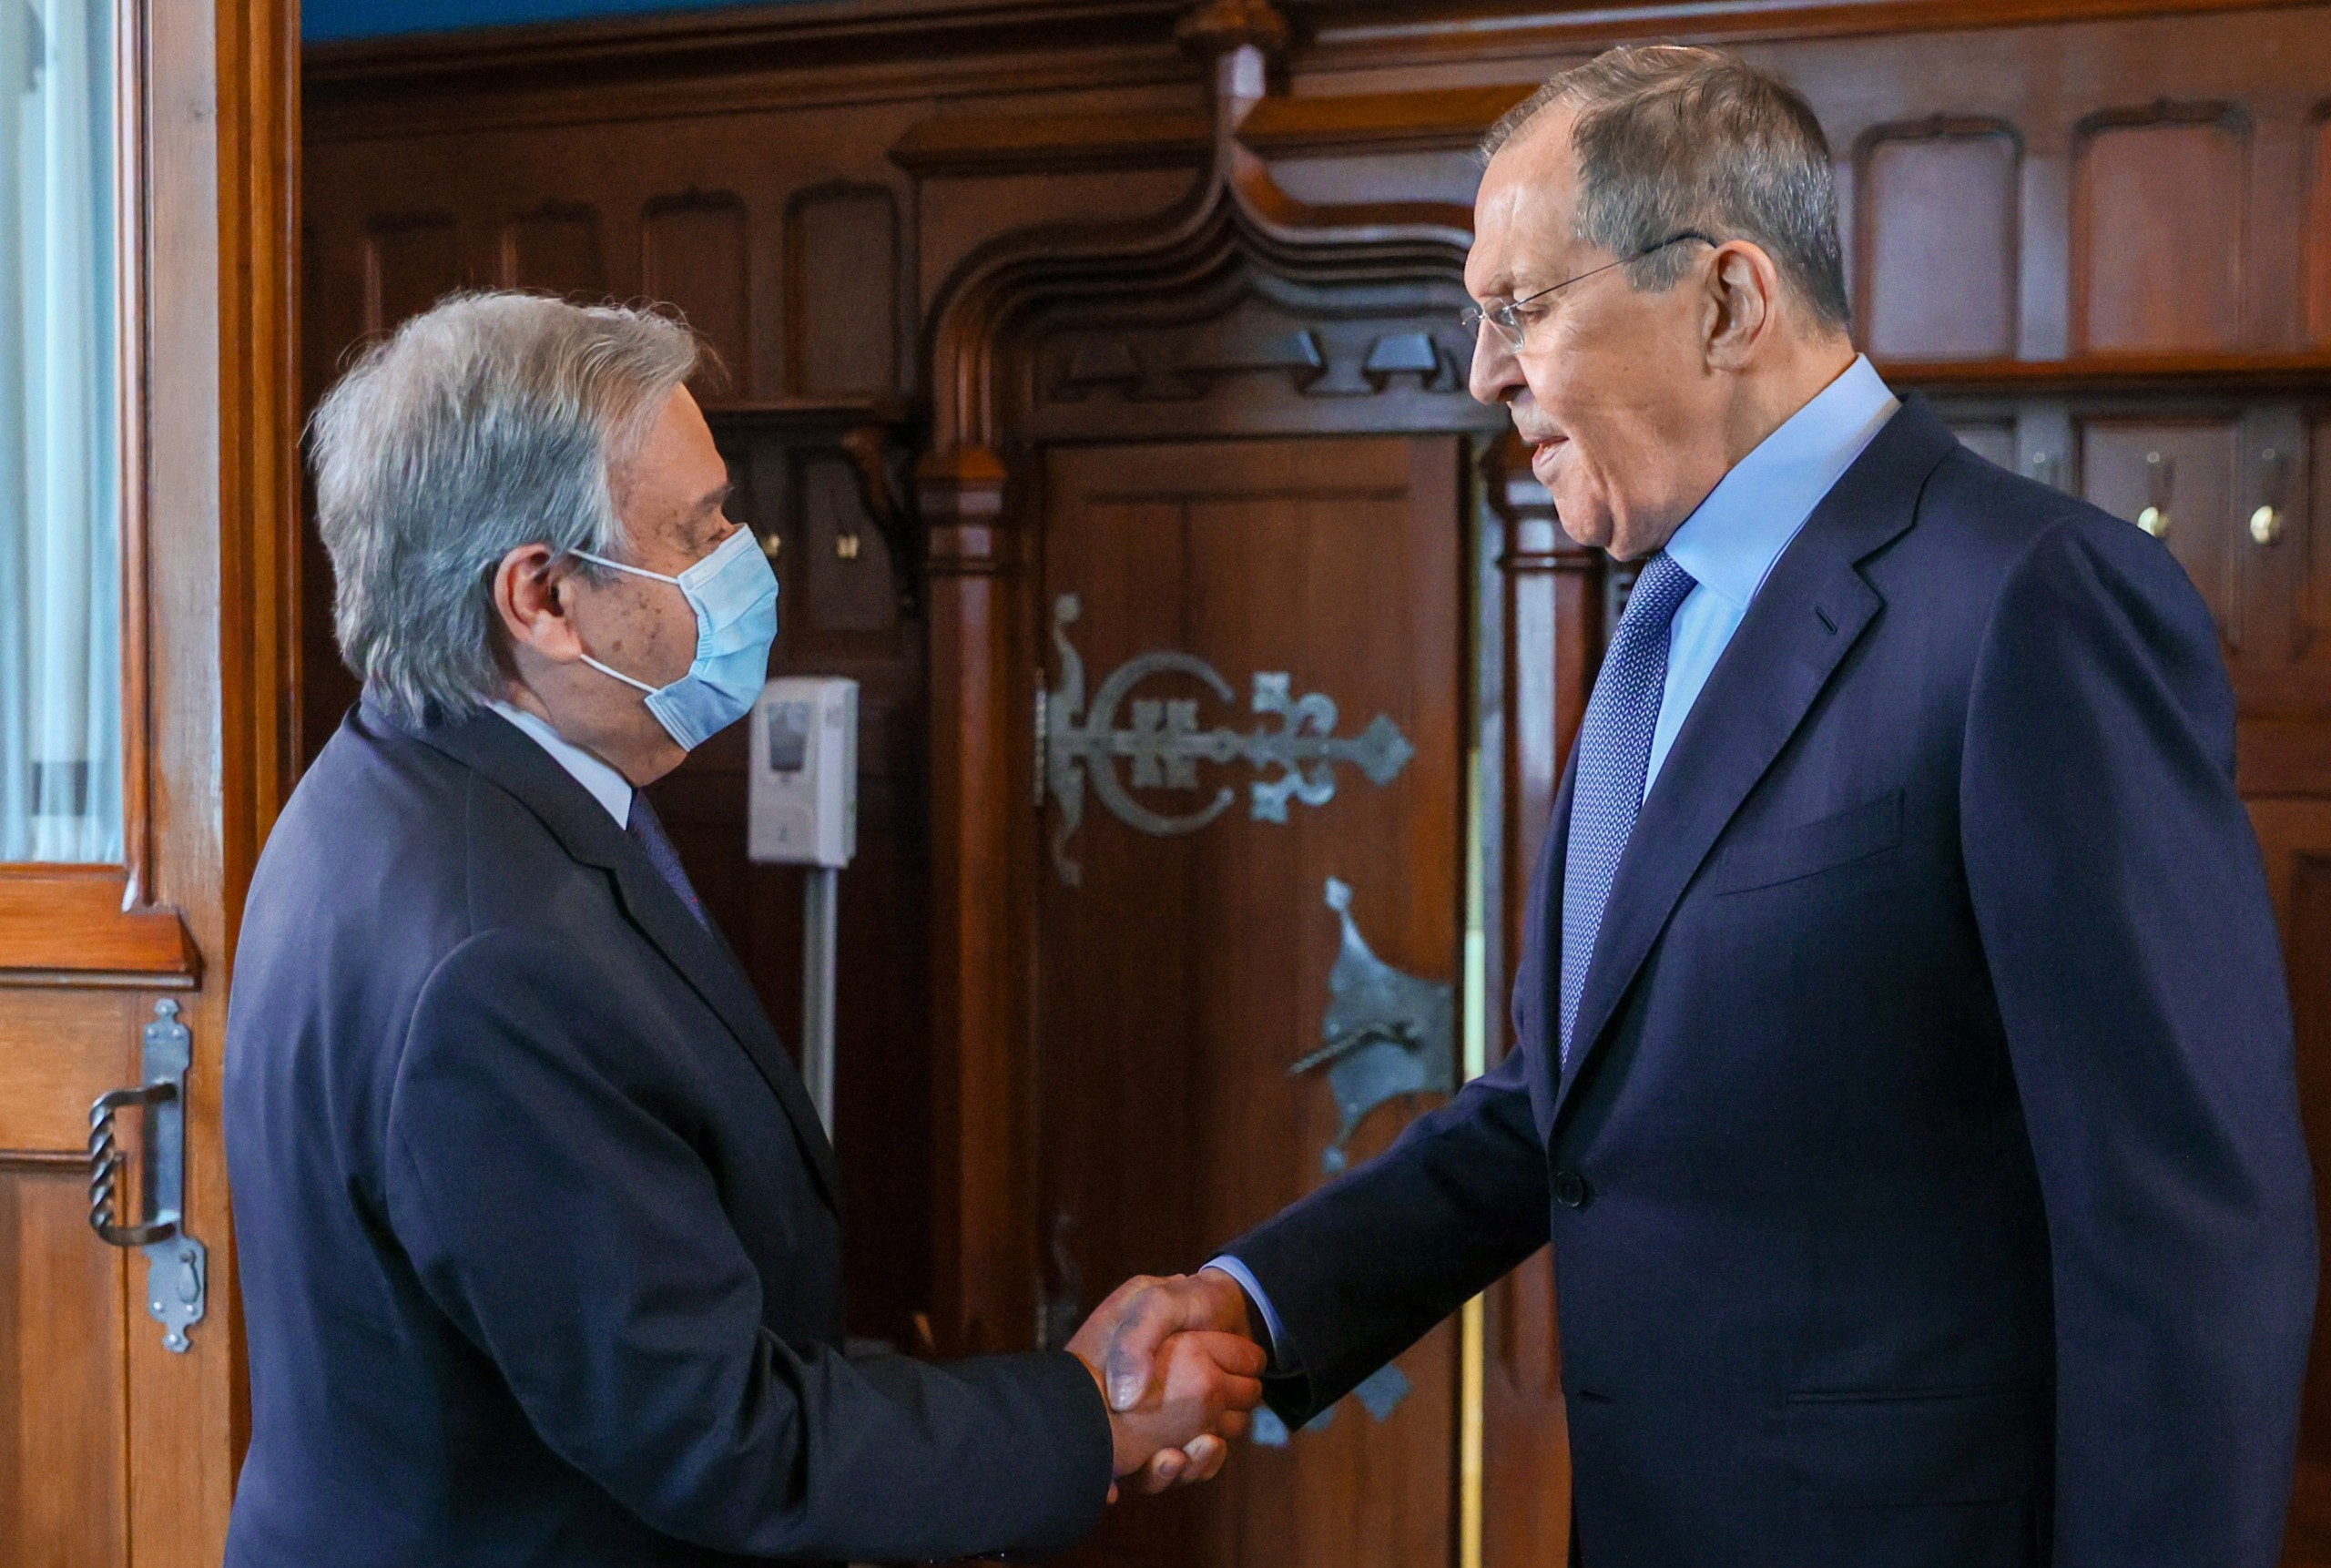 epa09909680 A handout photo made available by the press service of the  Russian Foreign Affairs Ministry shows Russian Foreign Minister Sergei Lavrov (R) and UN Secretary-General Antonio Guterres (L) shaking hands during their meeting in Moscow, Russia, 26 April 2022. UN Secretary-General is on a working visit to Moscow.  EPA/RUSSIAN FOREIGN AFFAIRS MINISTRY HANDOUT MANDATORY CREDIT / HANDOUT EDITORIAL USE ONLY/NO SALES